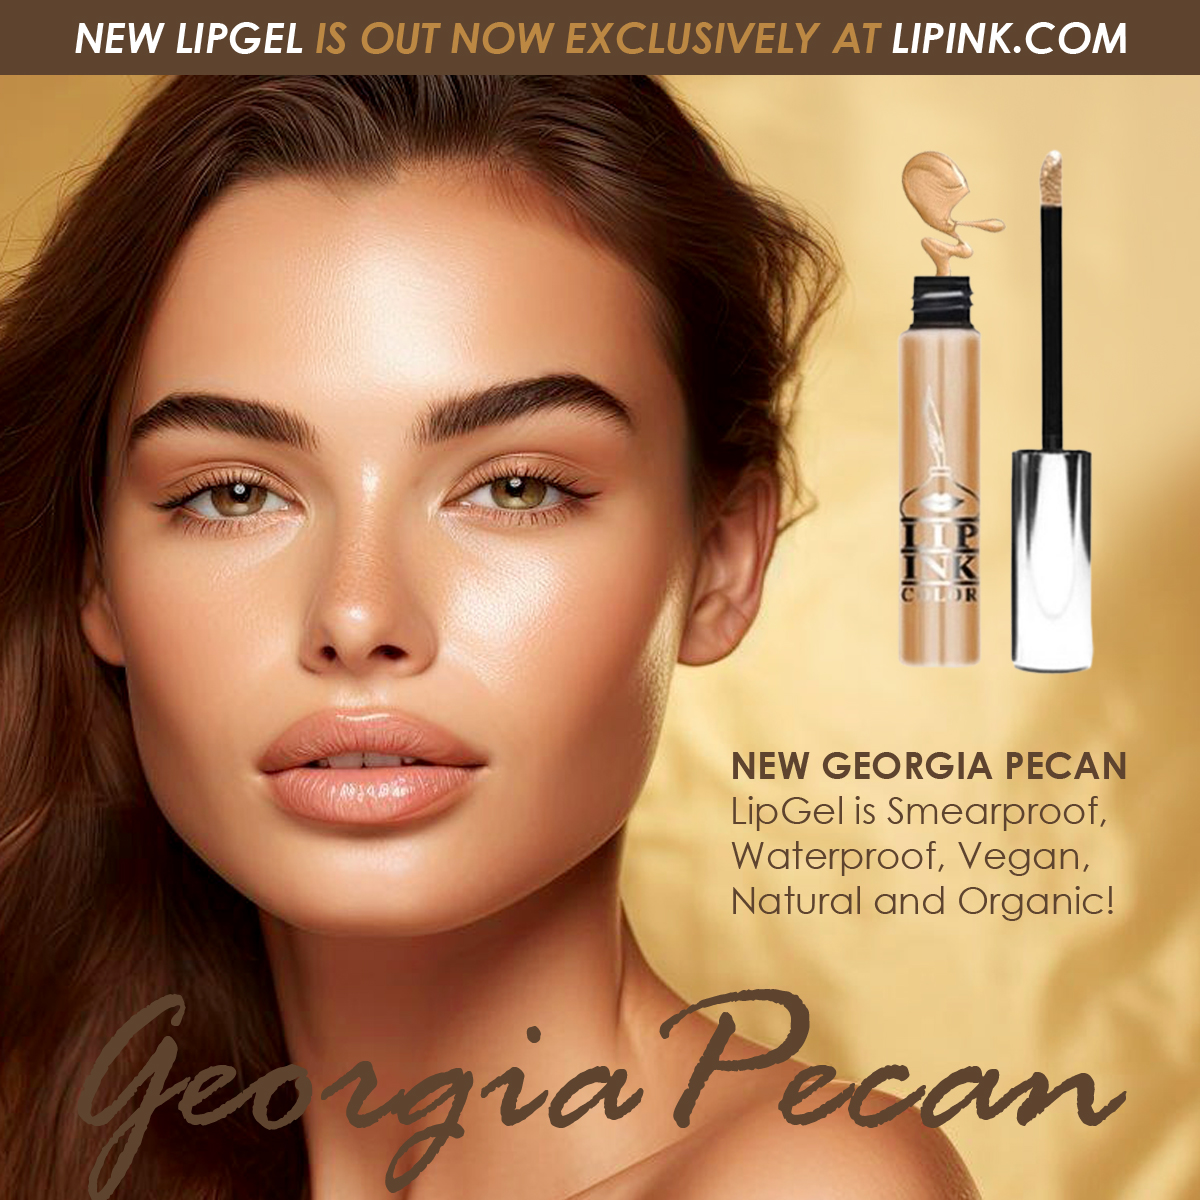 LIP INK New LipGel in Georgia Pecan. Has a golden mocha appearance, an earth tone shade with a touch of glam. Get it on Sale now by visiting our website at LIPINK.COM

#lipgel #lipstick #lippies #lipstain #makeup #cosmetics #cleanmakeup #organicmakeup #crueltyfree